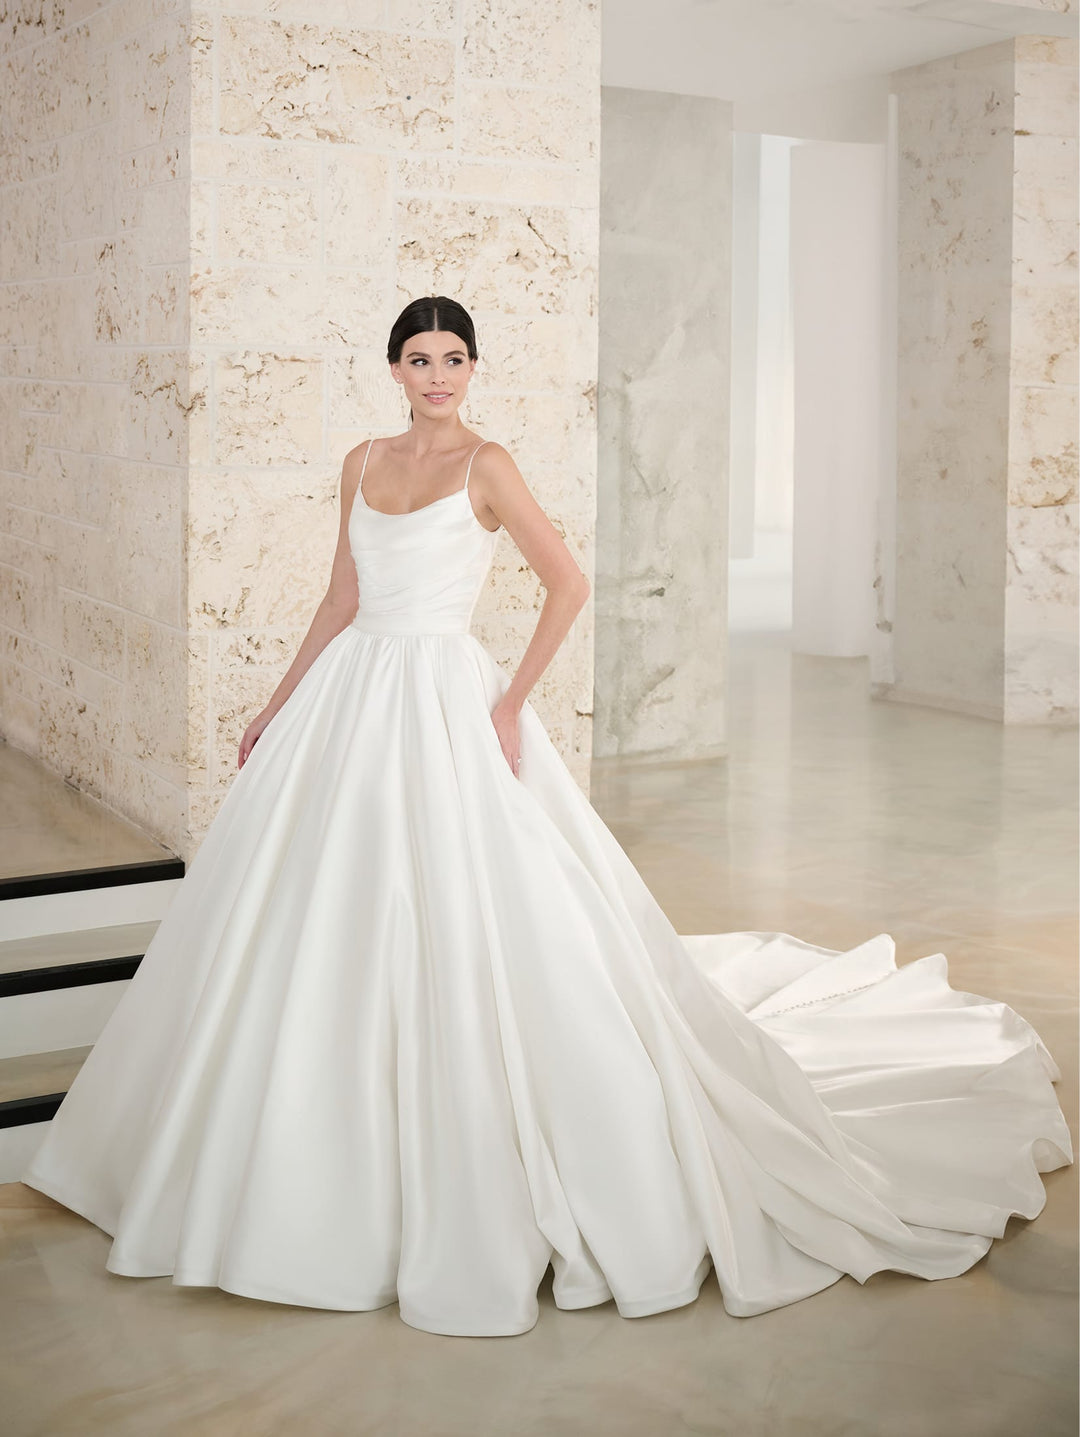 Satin Sleeveless A-line Bridal Gown by Adrianna Papell 31299